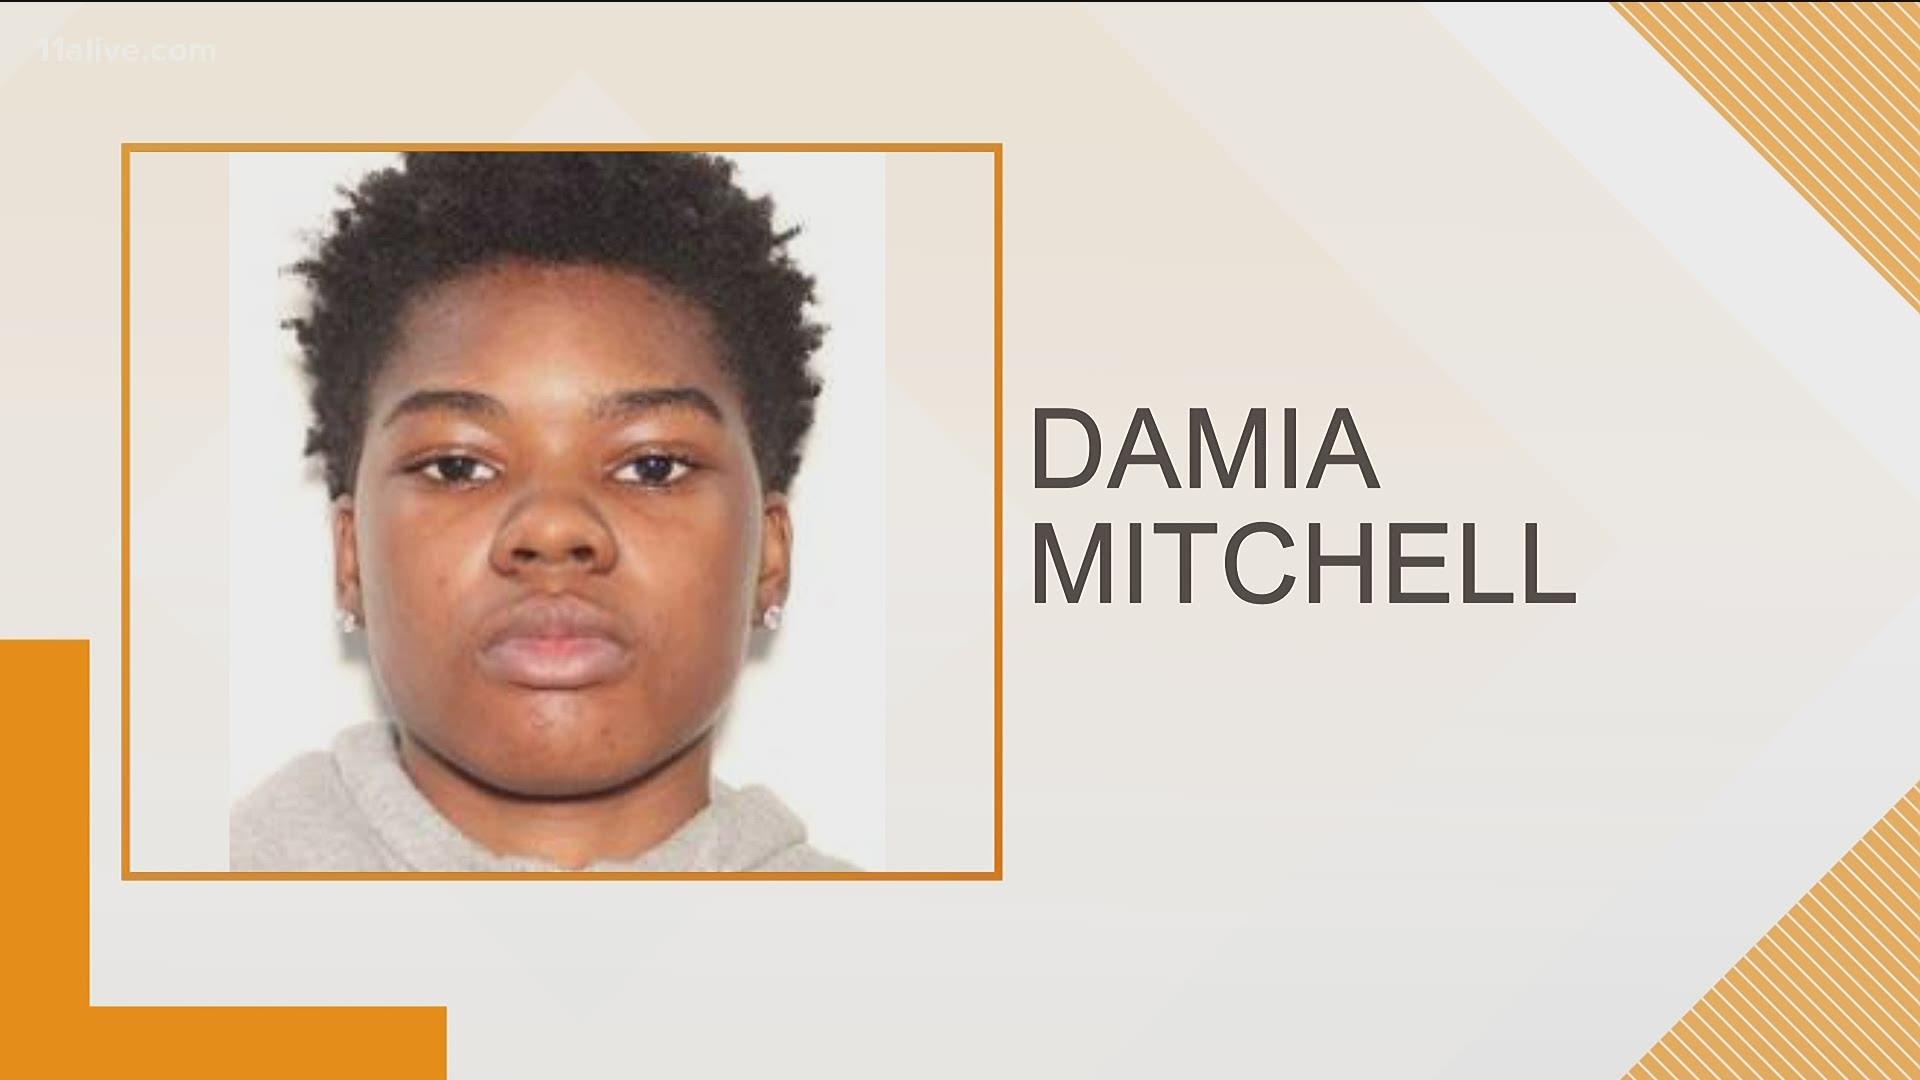 Warrants are out for Damia Mitchell.